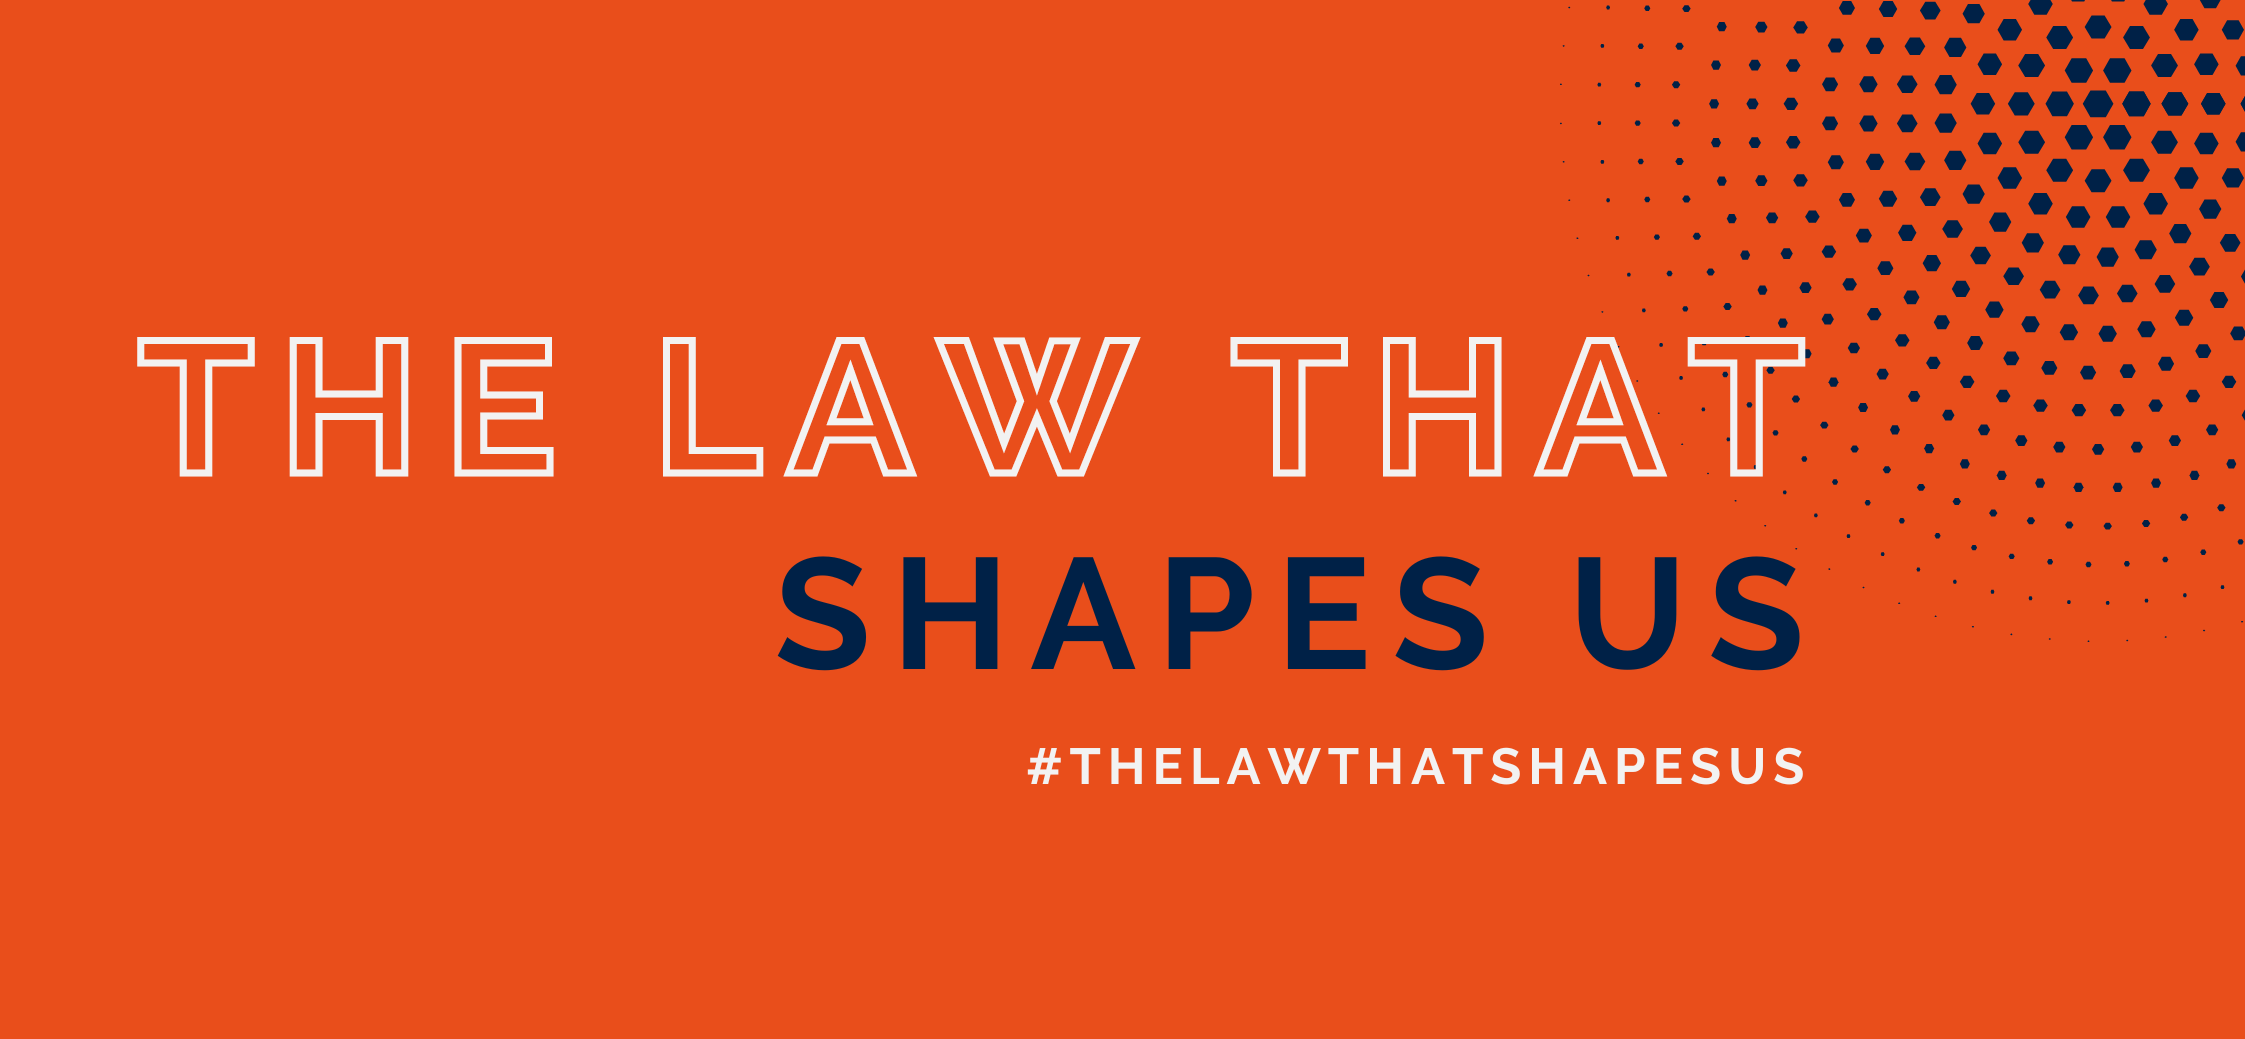 The Law That Shapes Us banner with the official hashtag #thelawthatshapesus